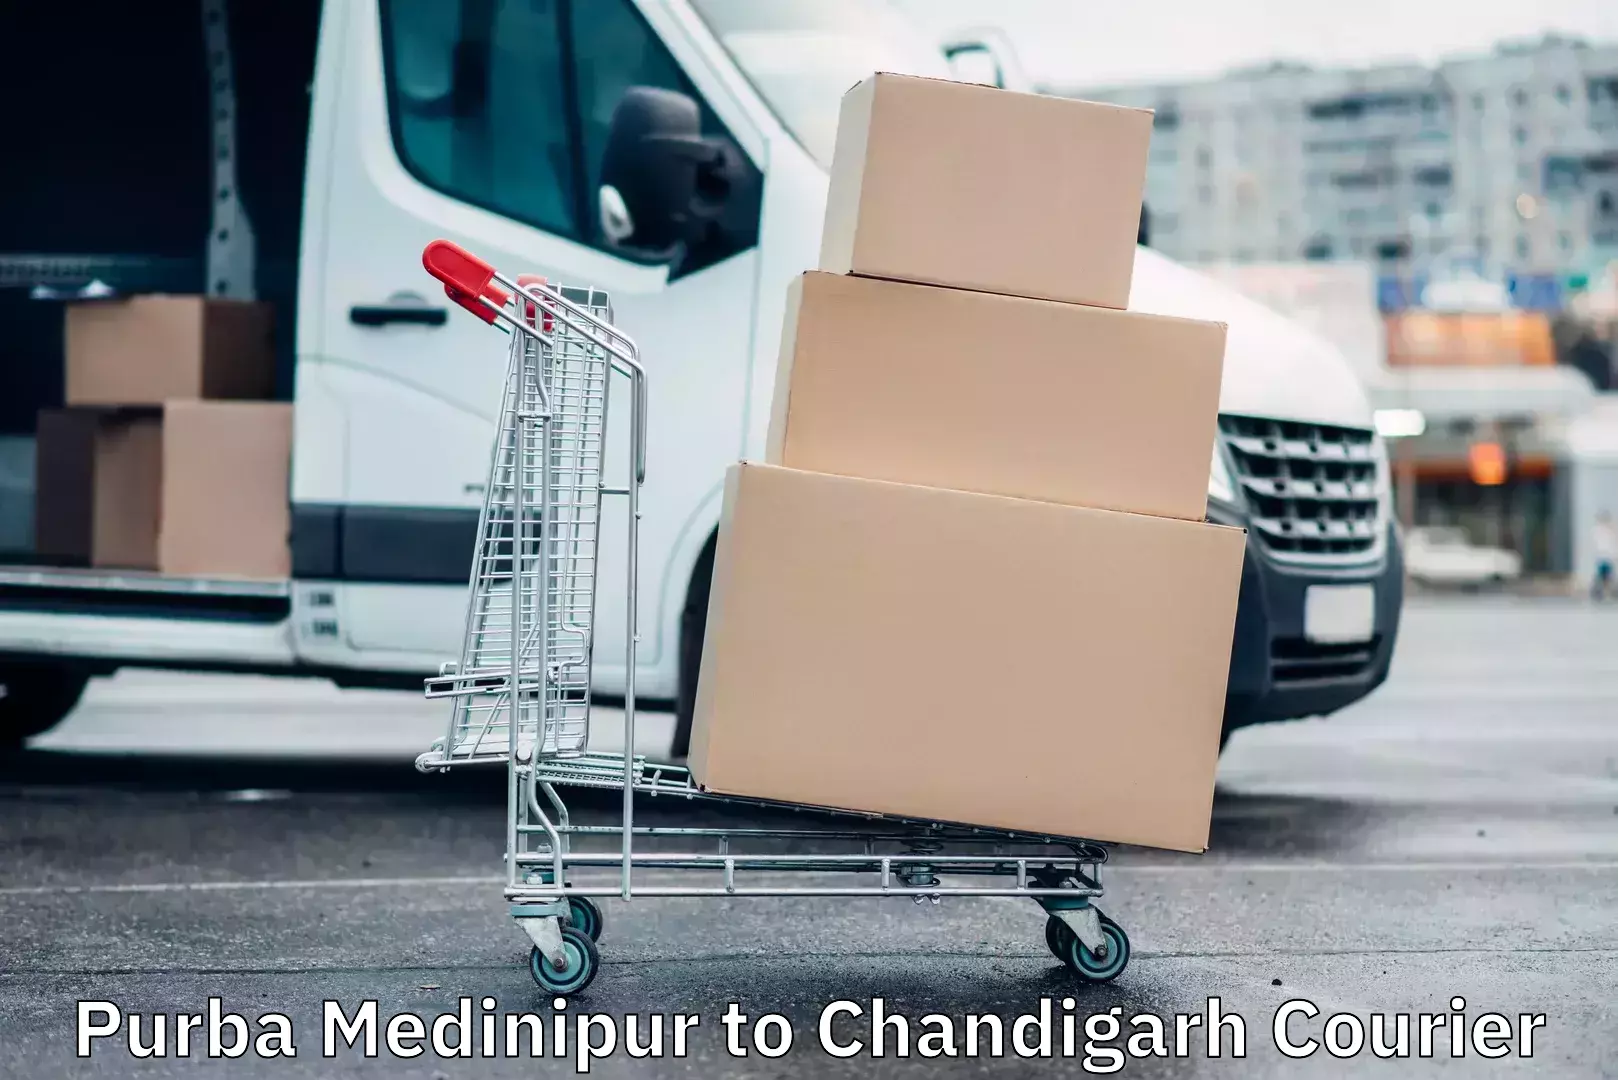 Subscription-based courier Purba Medinipur to Chandigarh